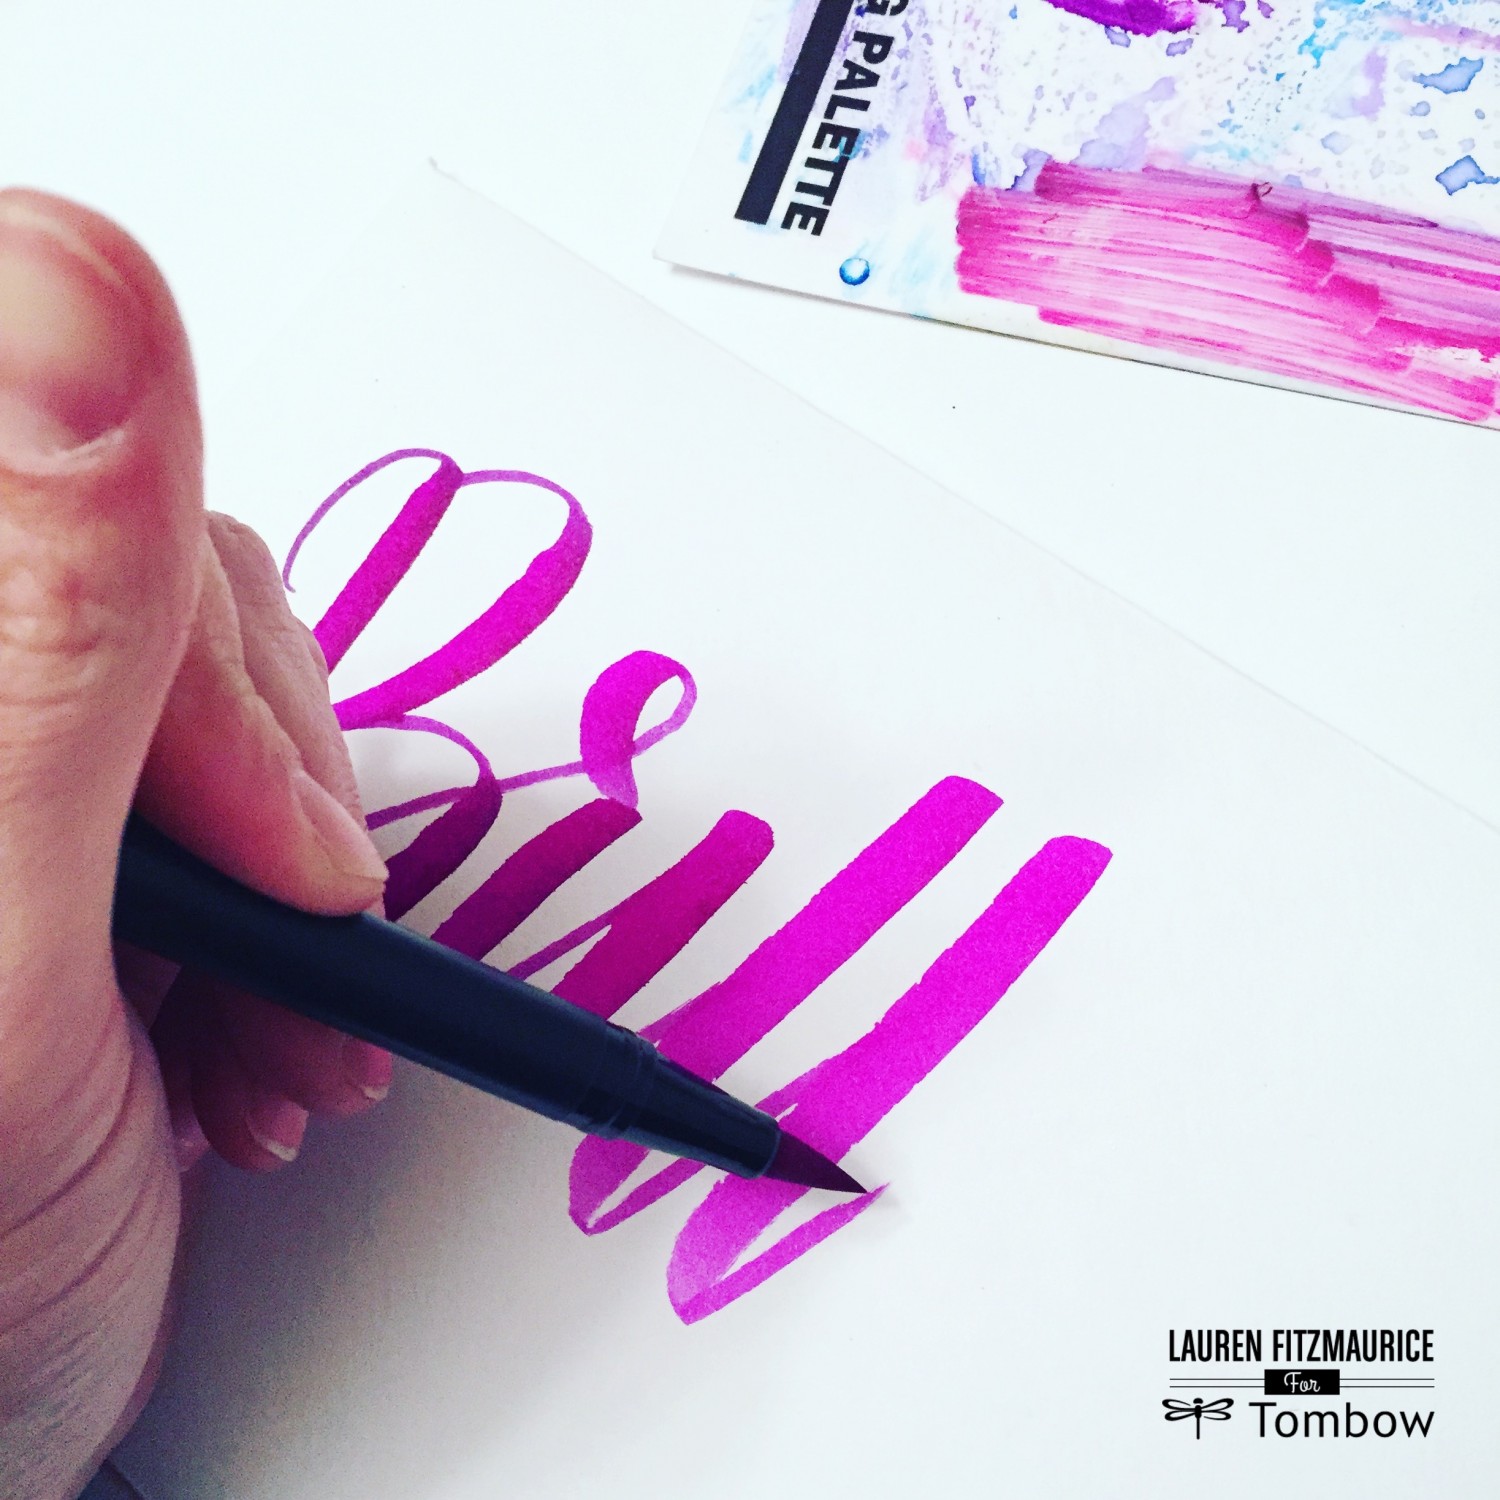 Top 10 tools every letterer needs!